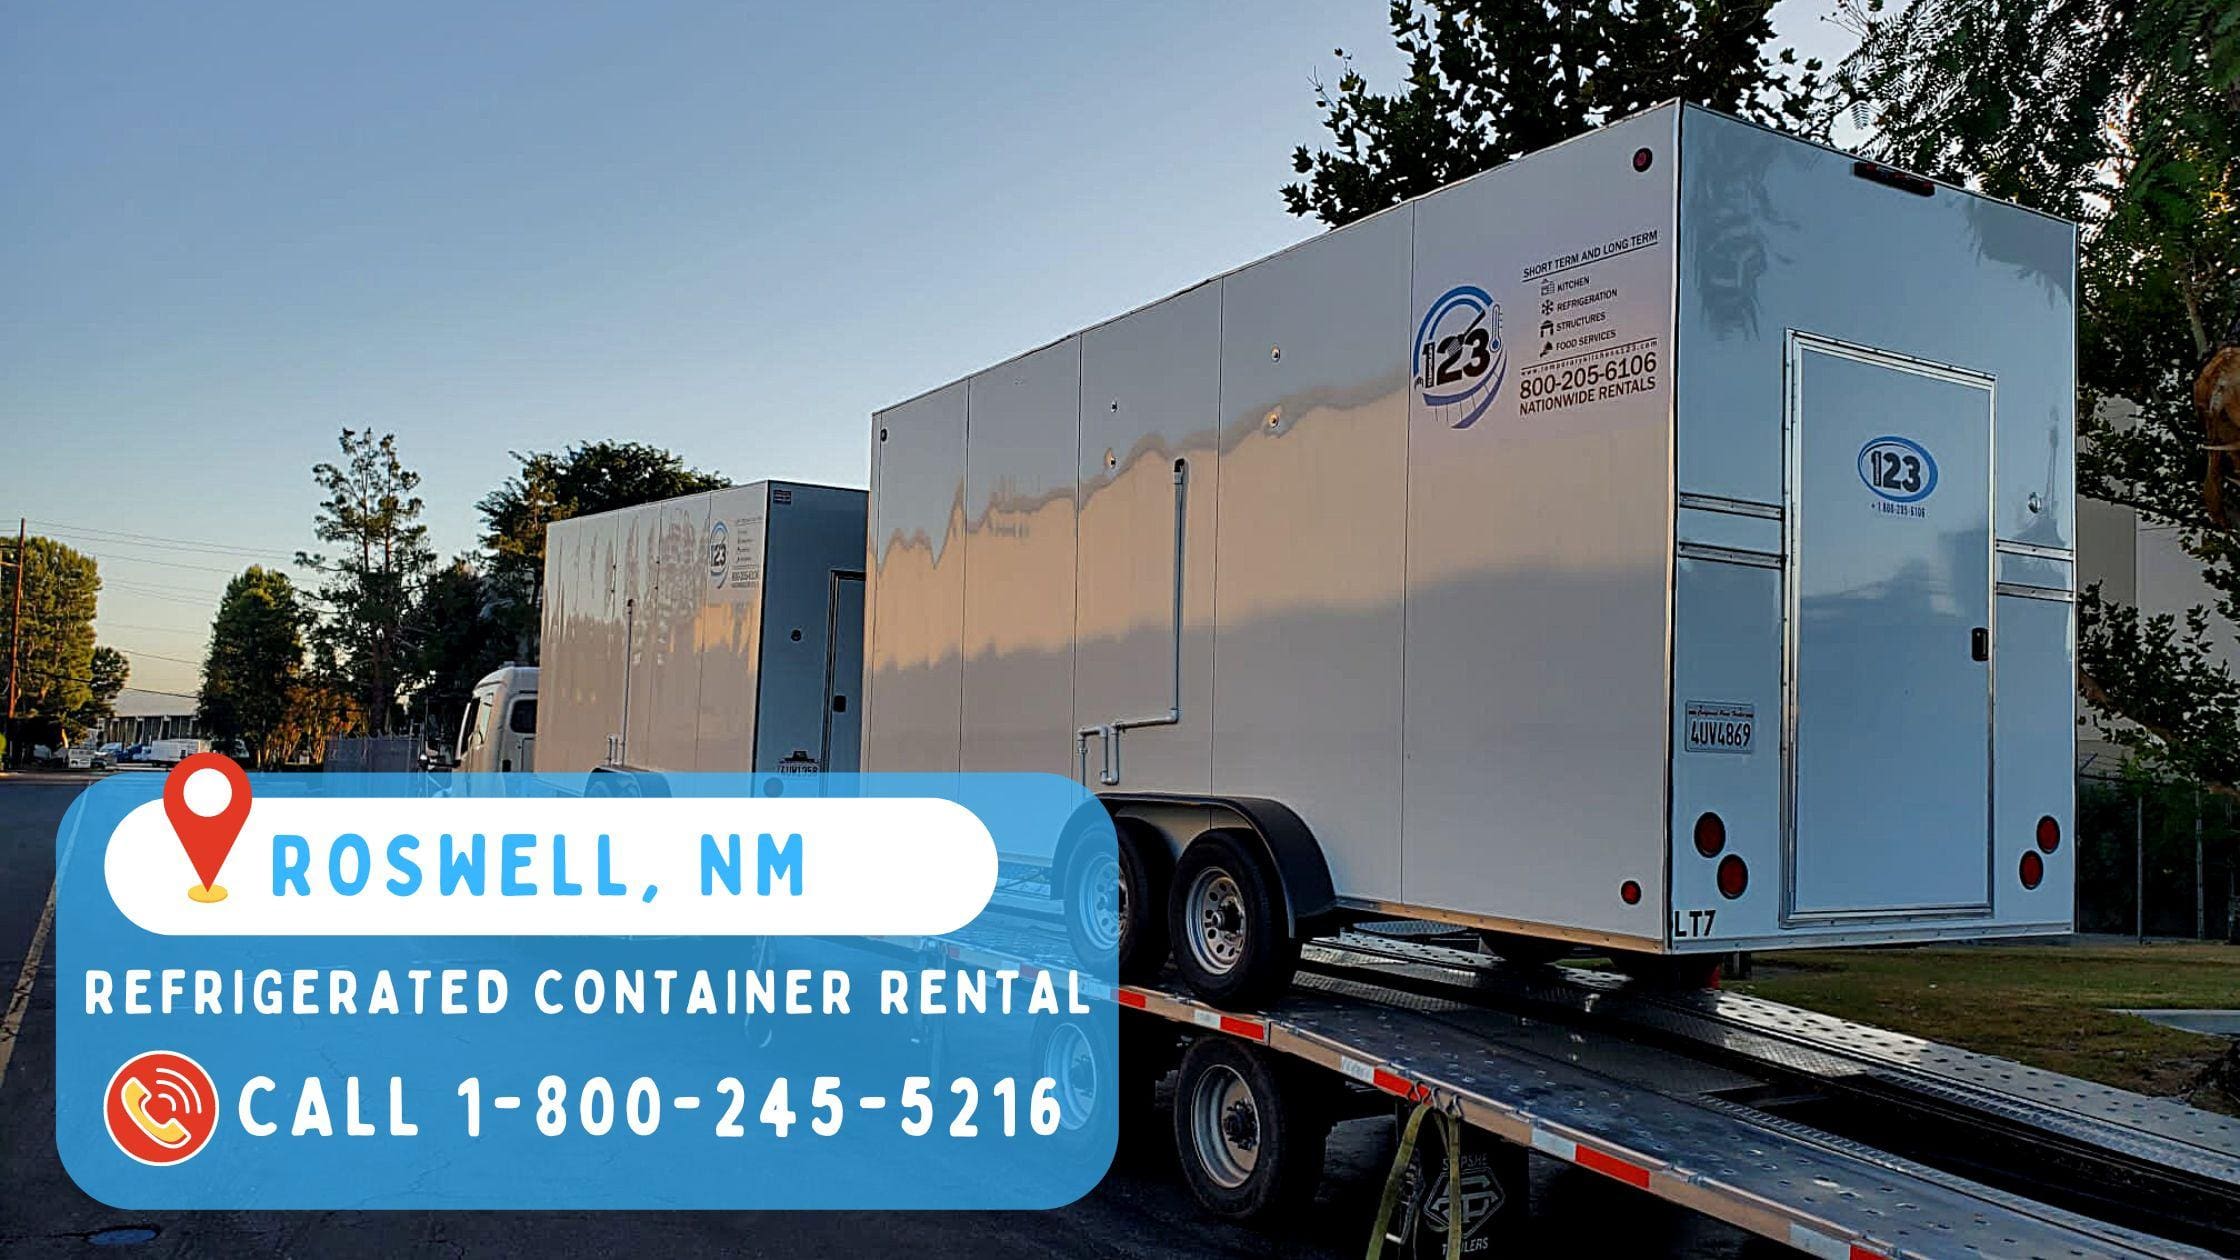 Refrigerated Container Rental in Roswell